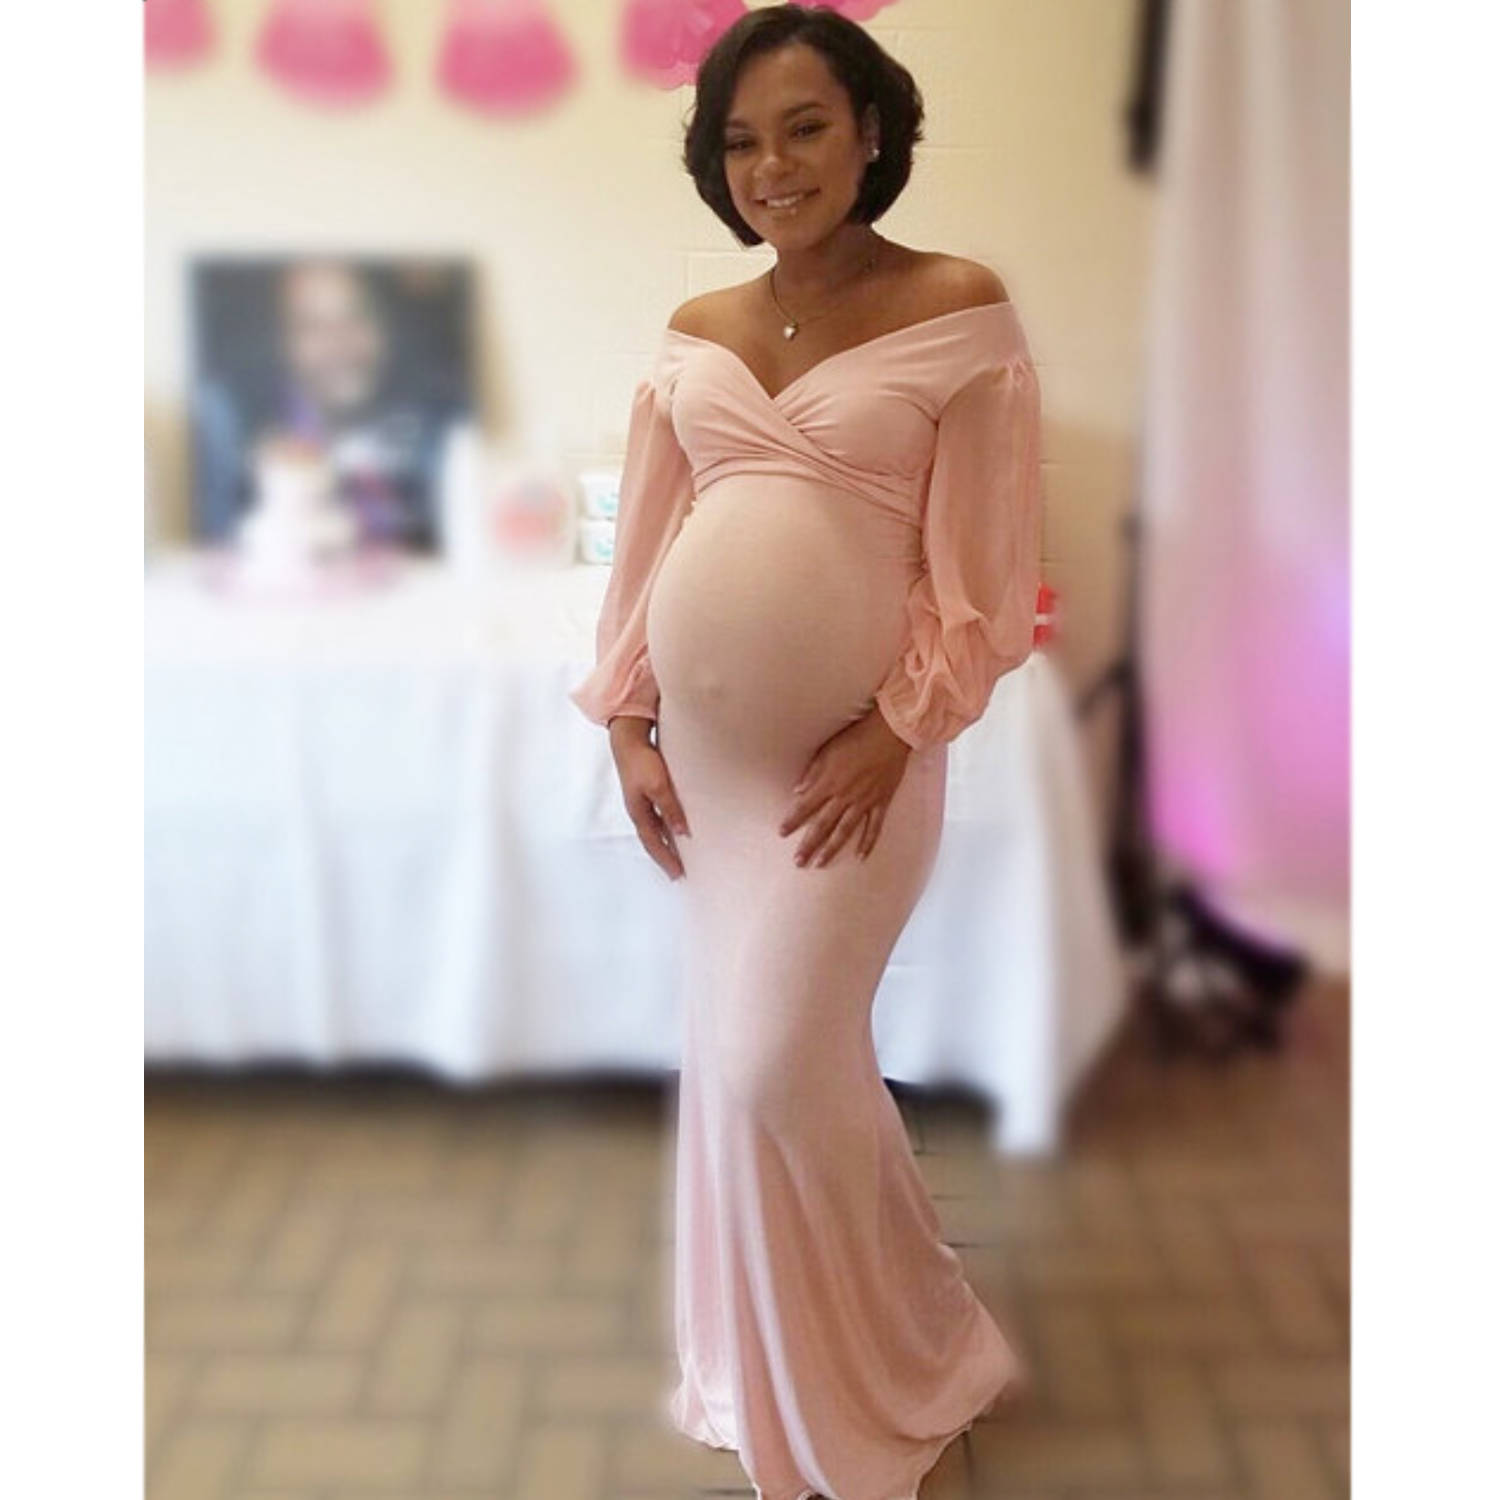 Full Size of Baby Shower:pink Maternity Dress Maternity Gowns For Photography Maternity Dresses For Baby Shower Mom And Dad Baby Shower Outfits A Pea In The Pod Maternity Clothes Maternity Dresses Formal 2 Searches Left. What Should I Wear To My Baby Shower